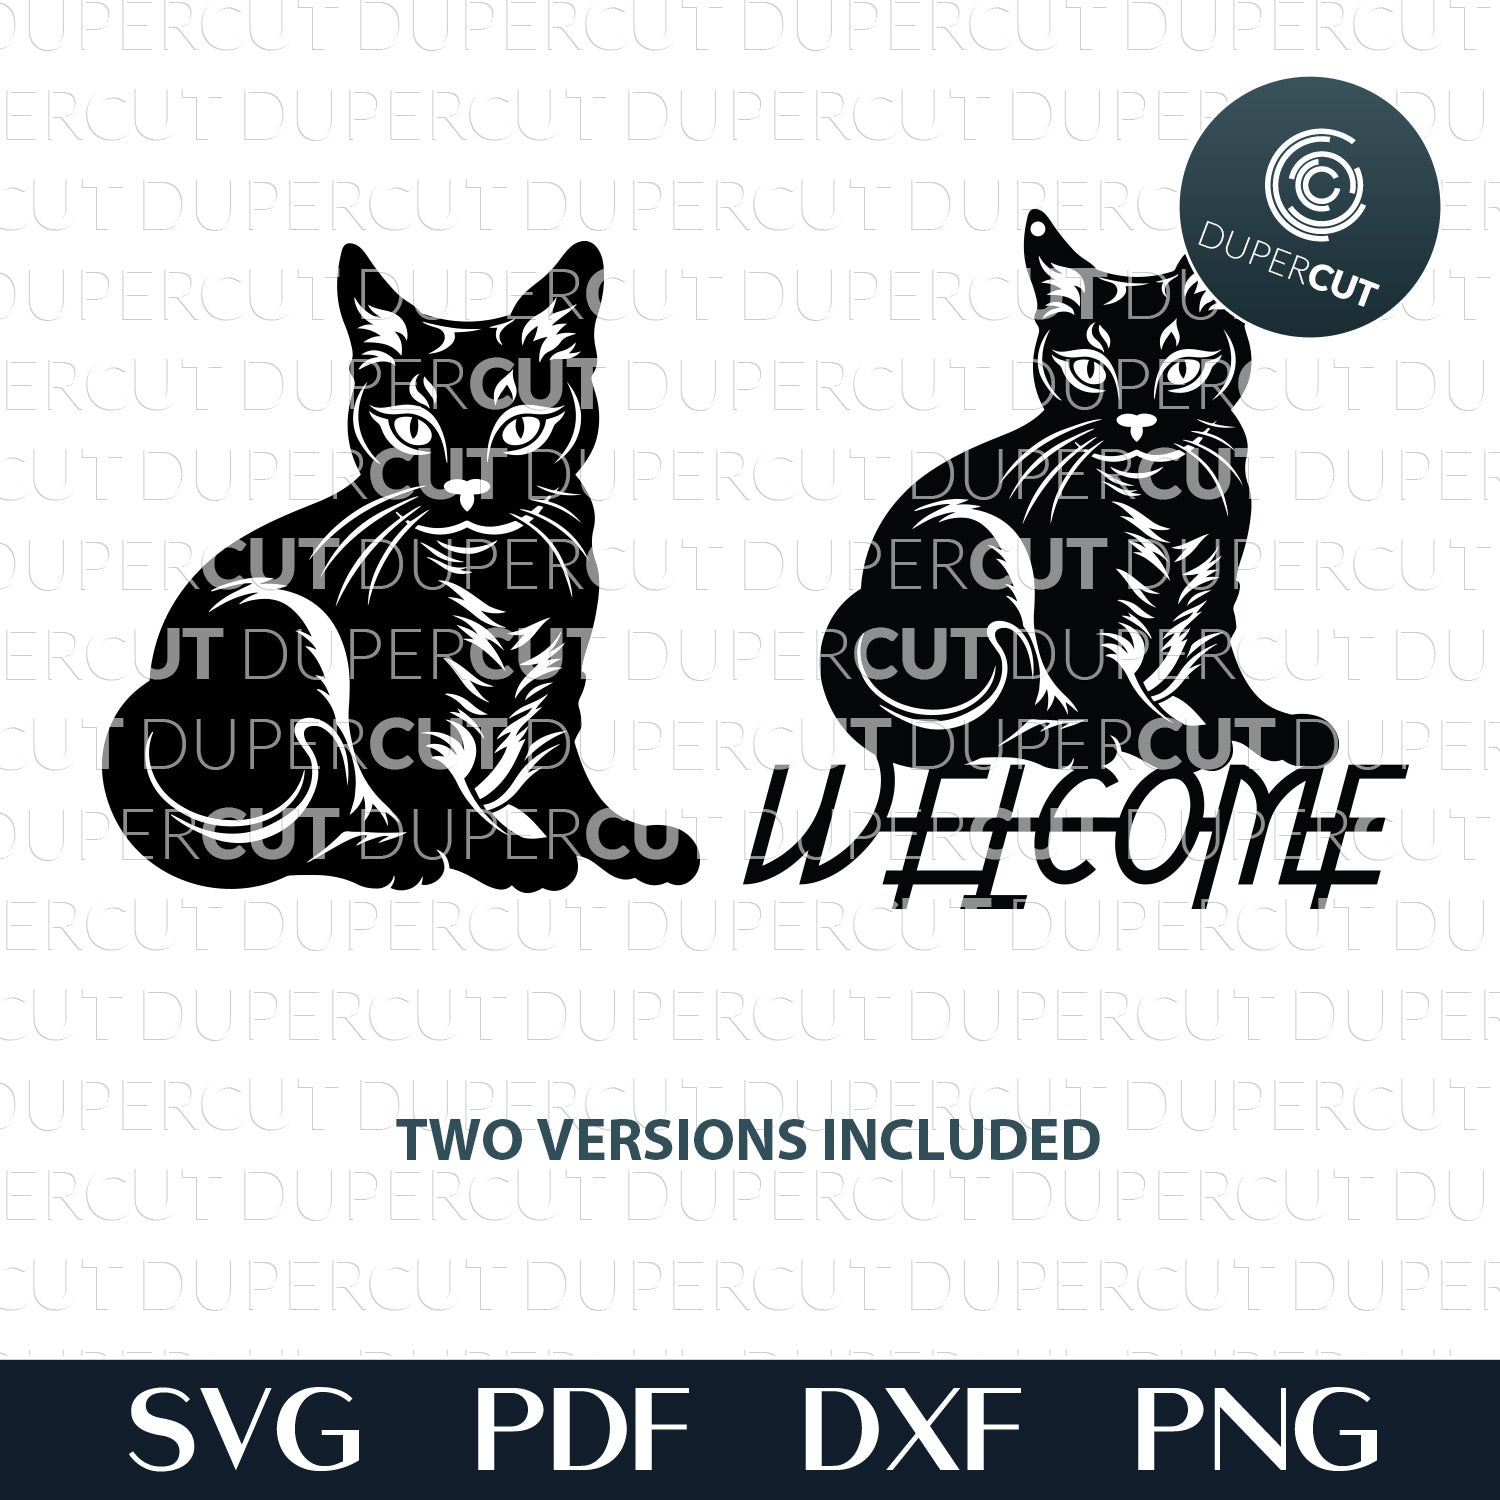 Black cat silhouette, Cat welcome sign door hanger - SVG DXF vector files for Glowforge, Cricut, Silhouette cameo, CNC plasma machines by www.DuperCut.com